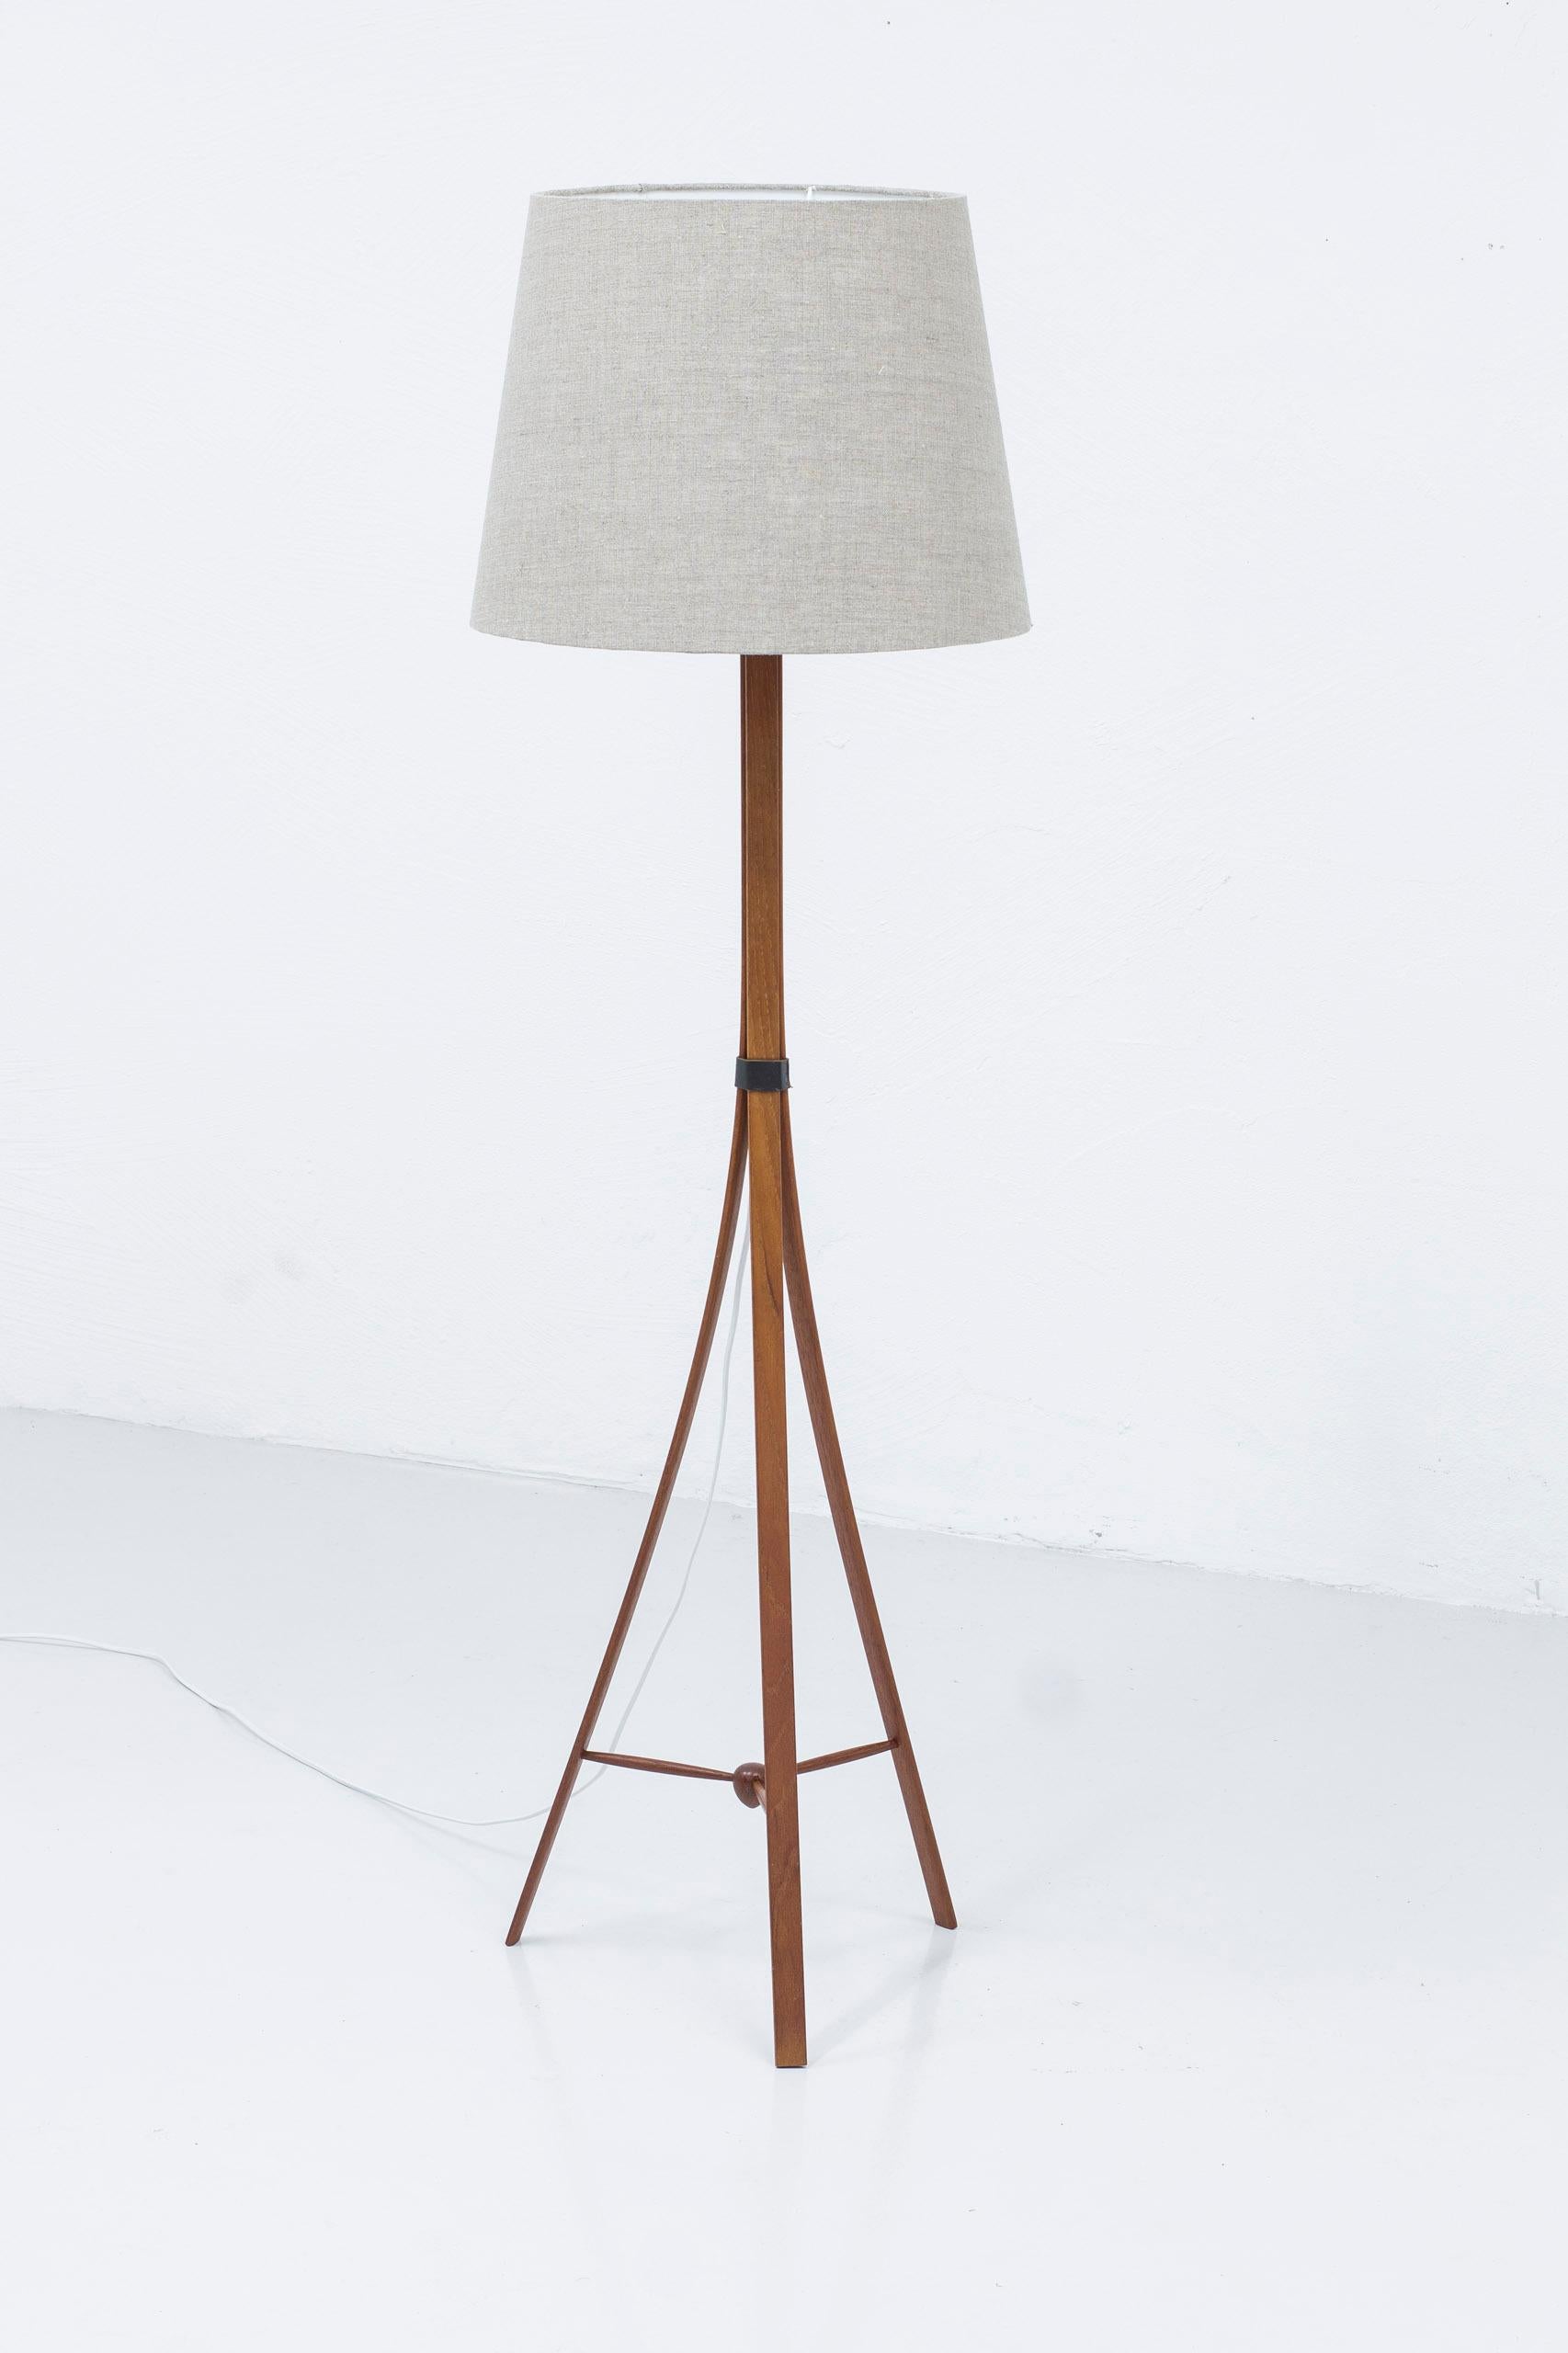 Floor lamp model G-35 designed by Alf Svensson. Produced in Sweden by Bergboms during the 1950s. Rare version made from steam bent solid teak, black original leather straps and brass lamp holder. Shade in grey linen fabric. Bakelite turning light